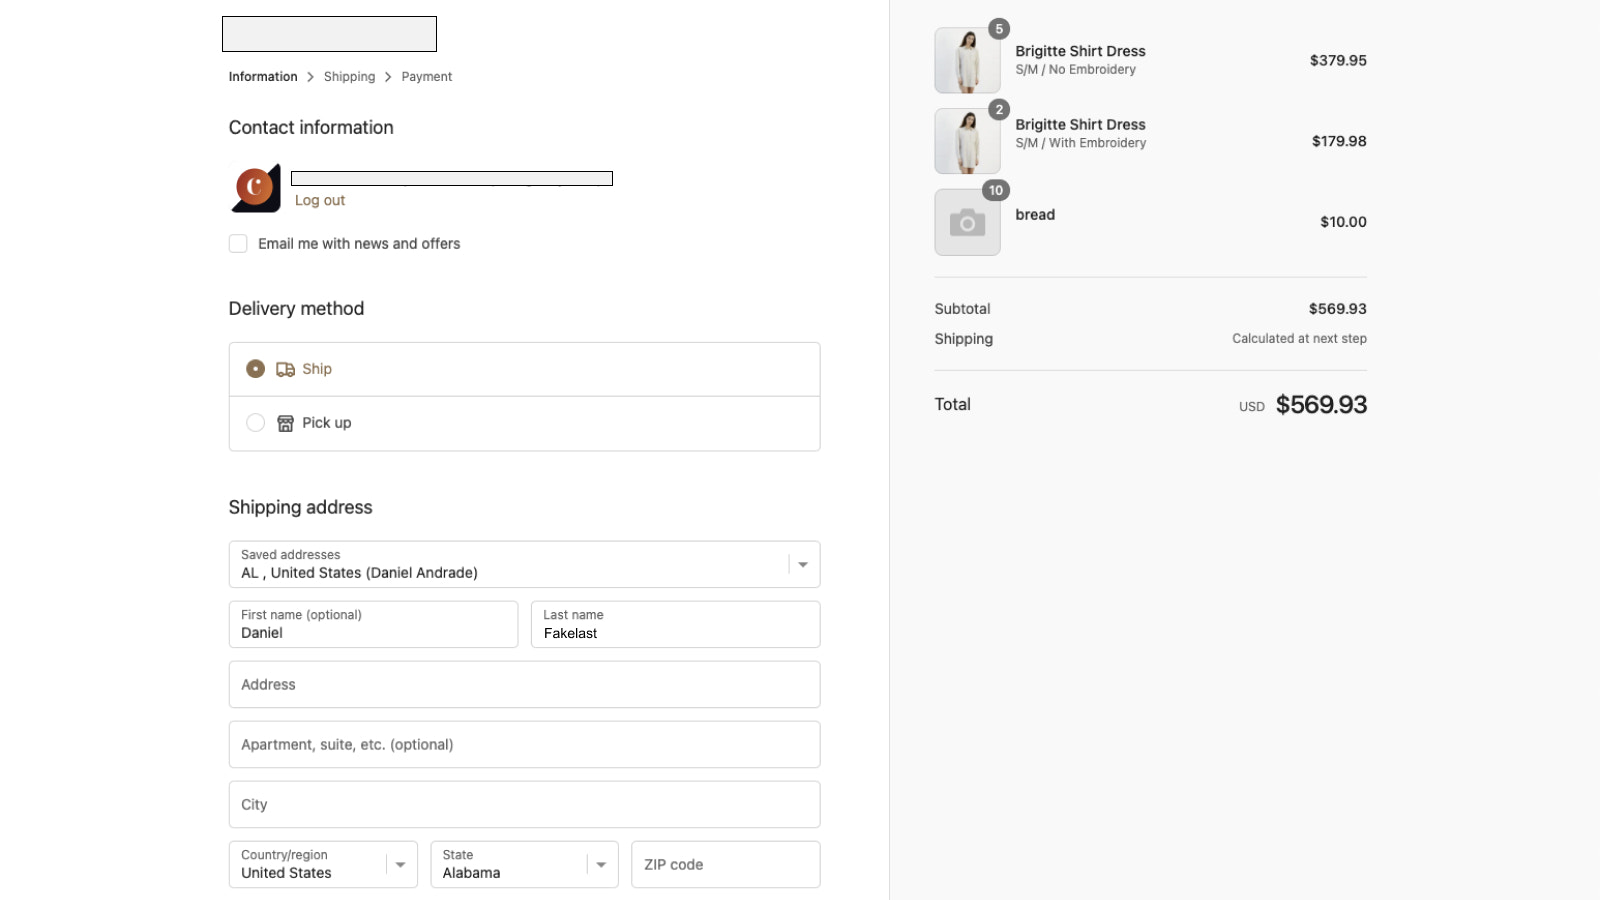 Clicking an invoice takes customers directly to checkout